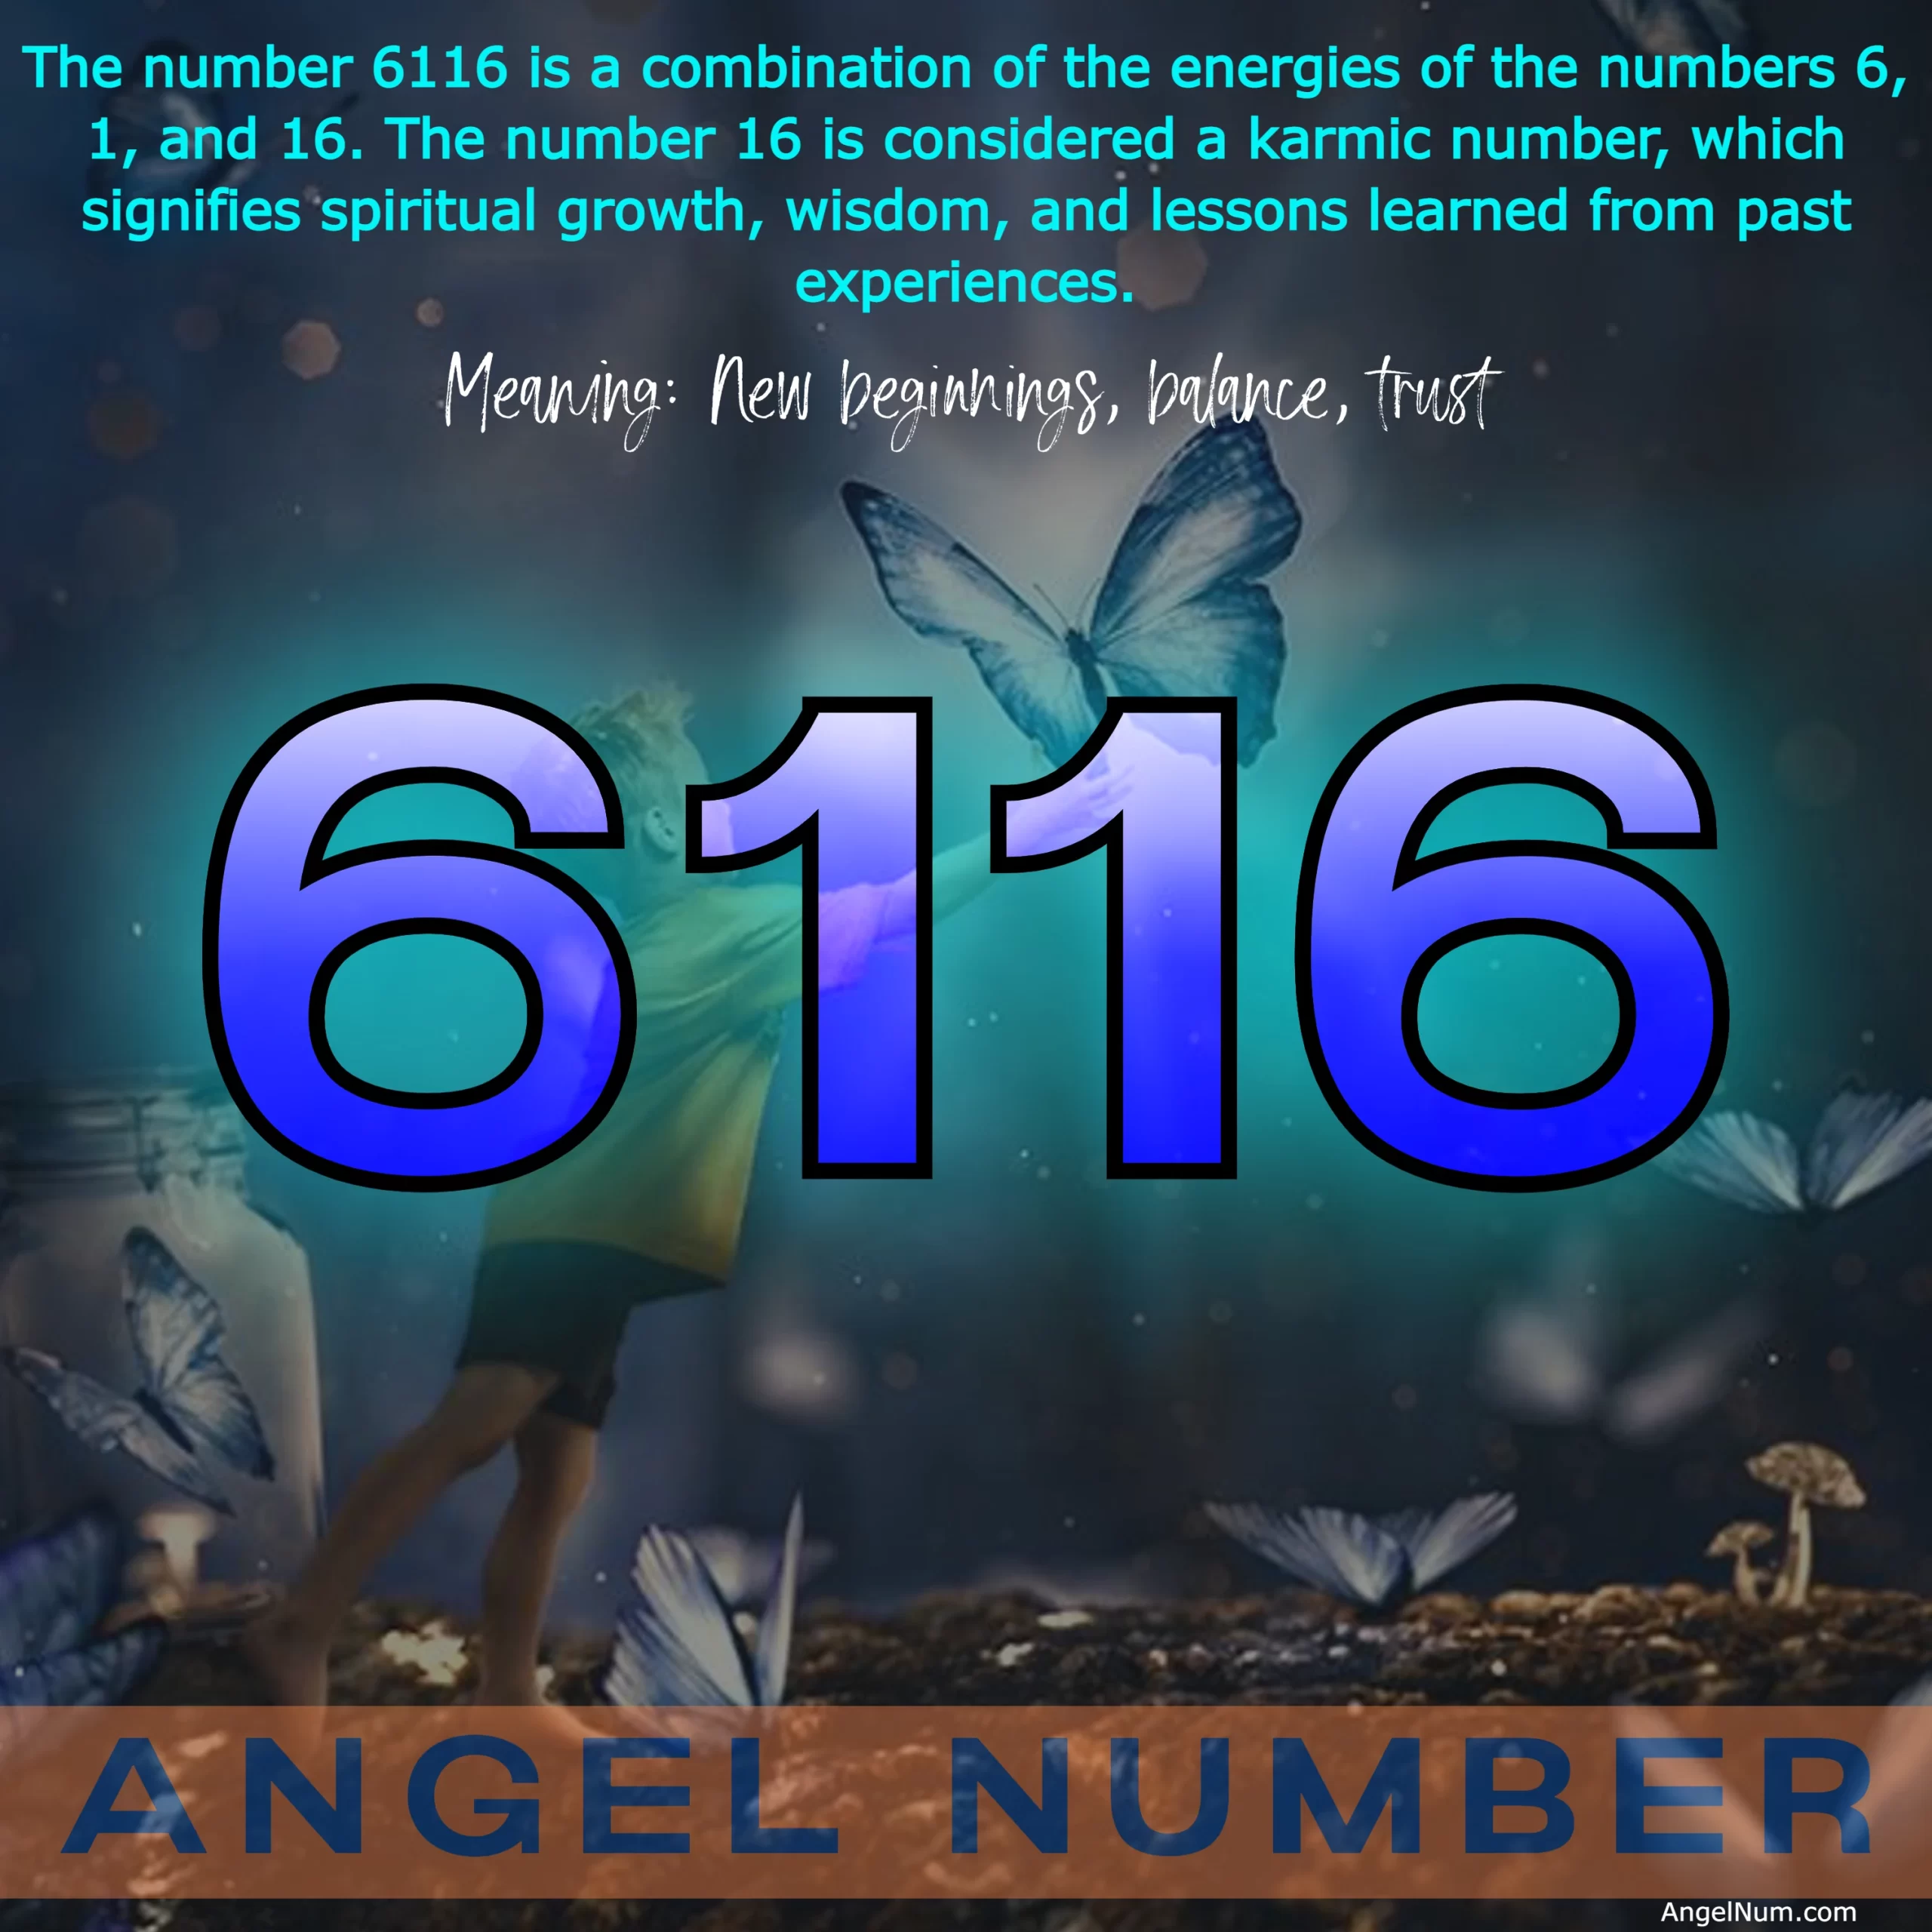 Angel Number 6116: Embrace New Beginnings and Find Balance